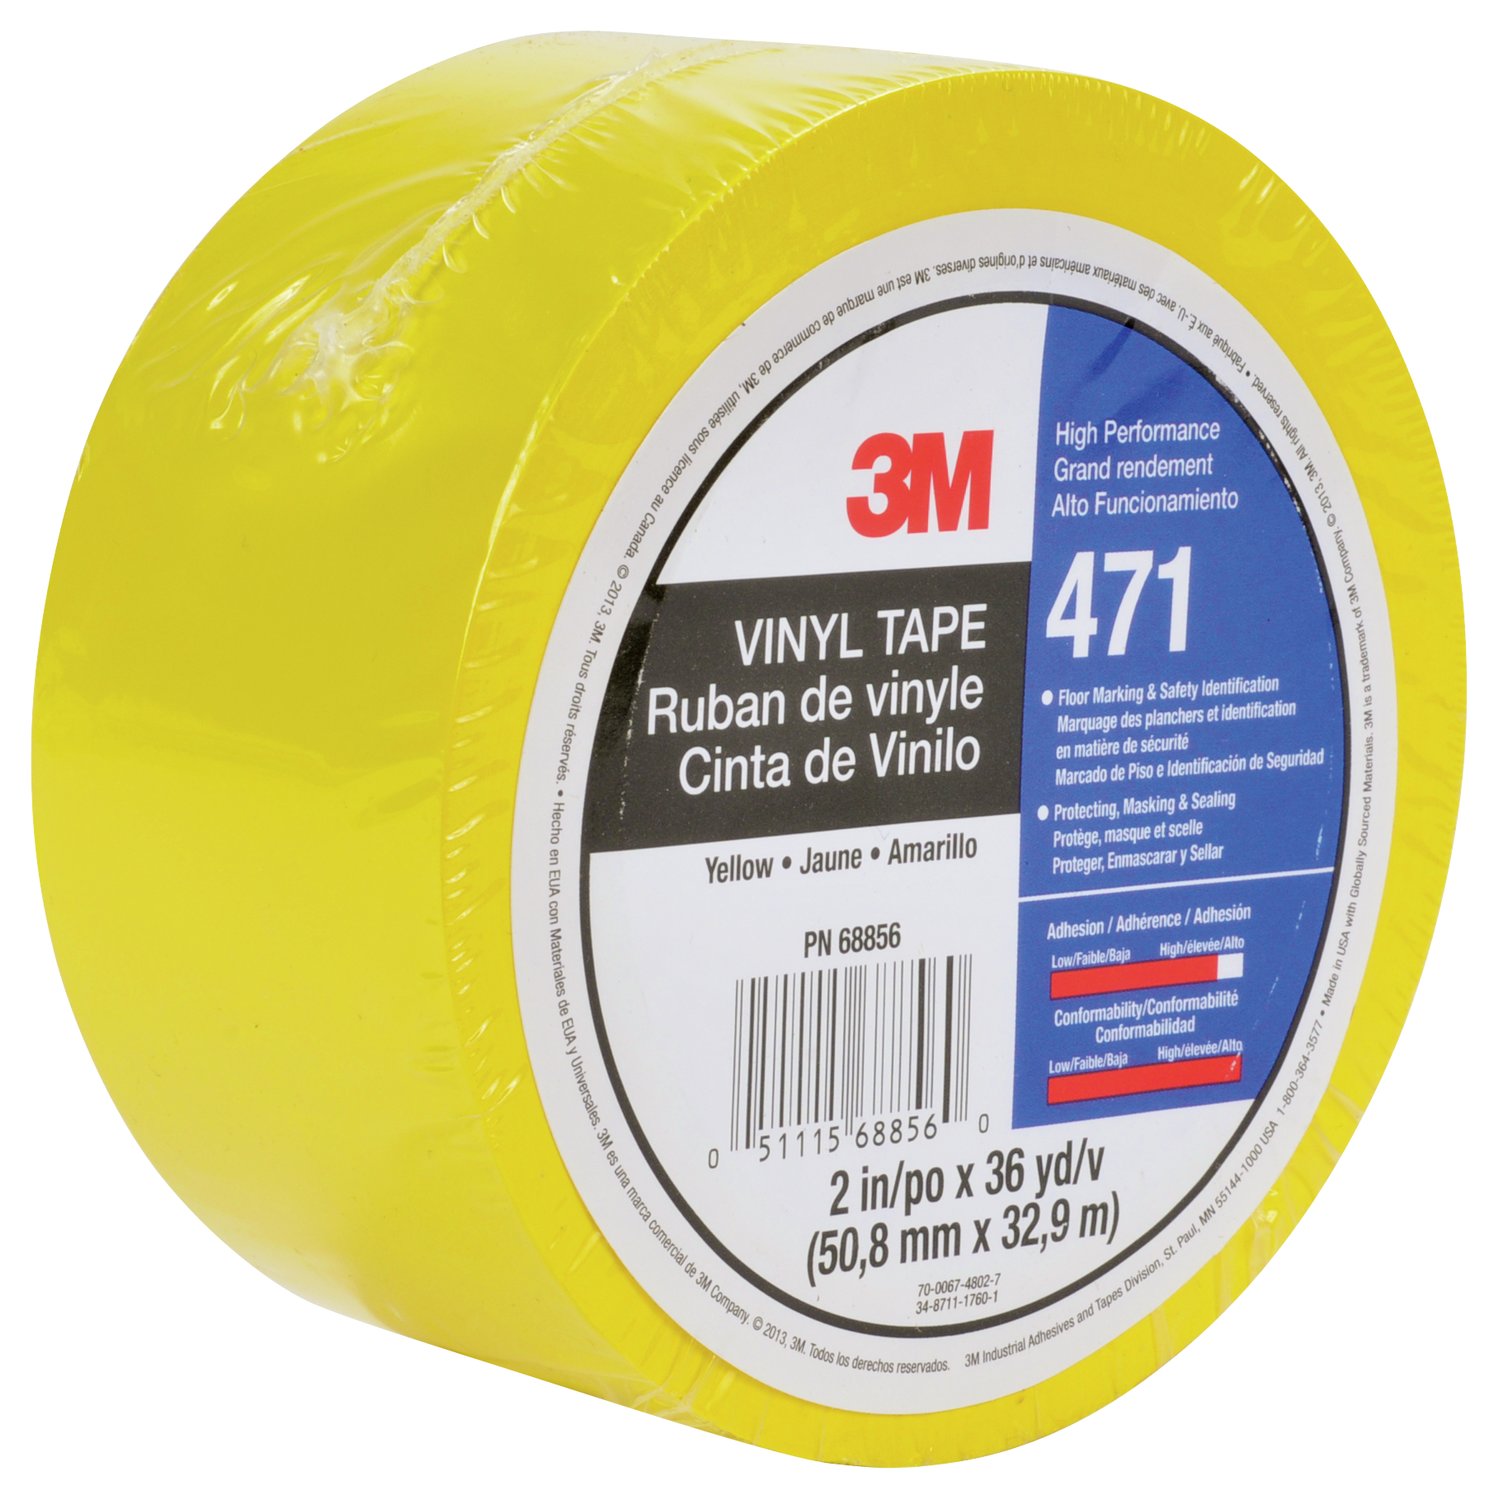 3M VHB Adhesive Mounting Tape for Aluminum - 3M Brand 5915 Series - 100 ft  Spool